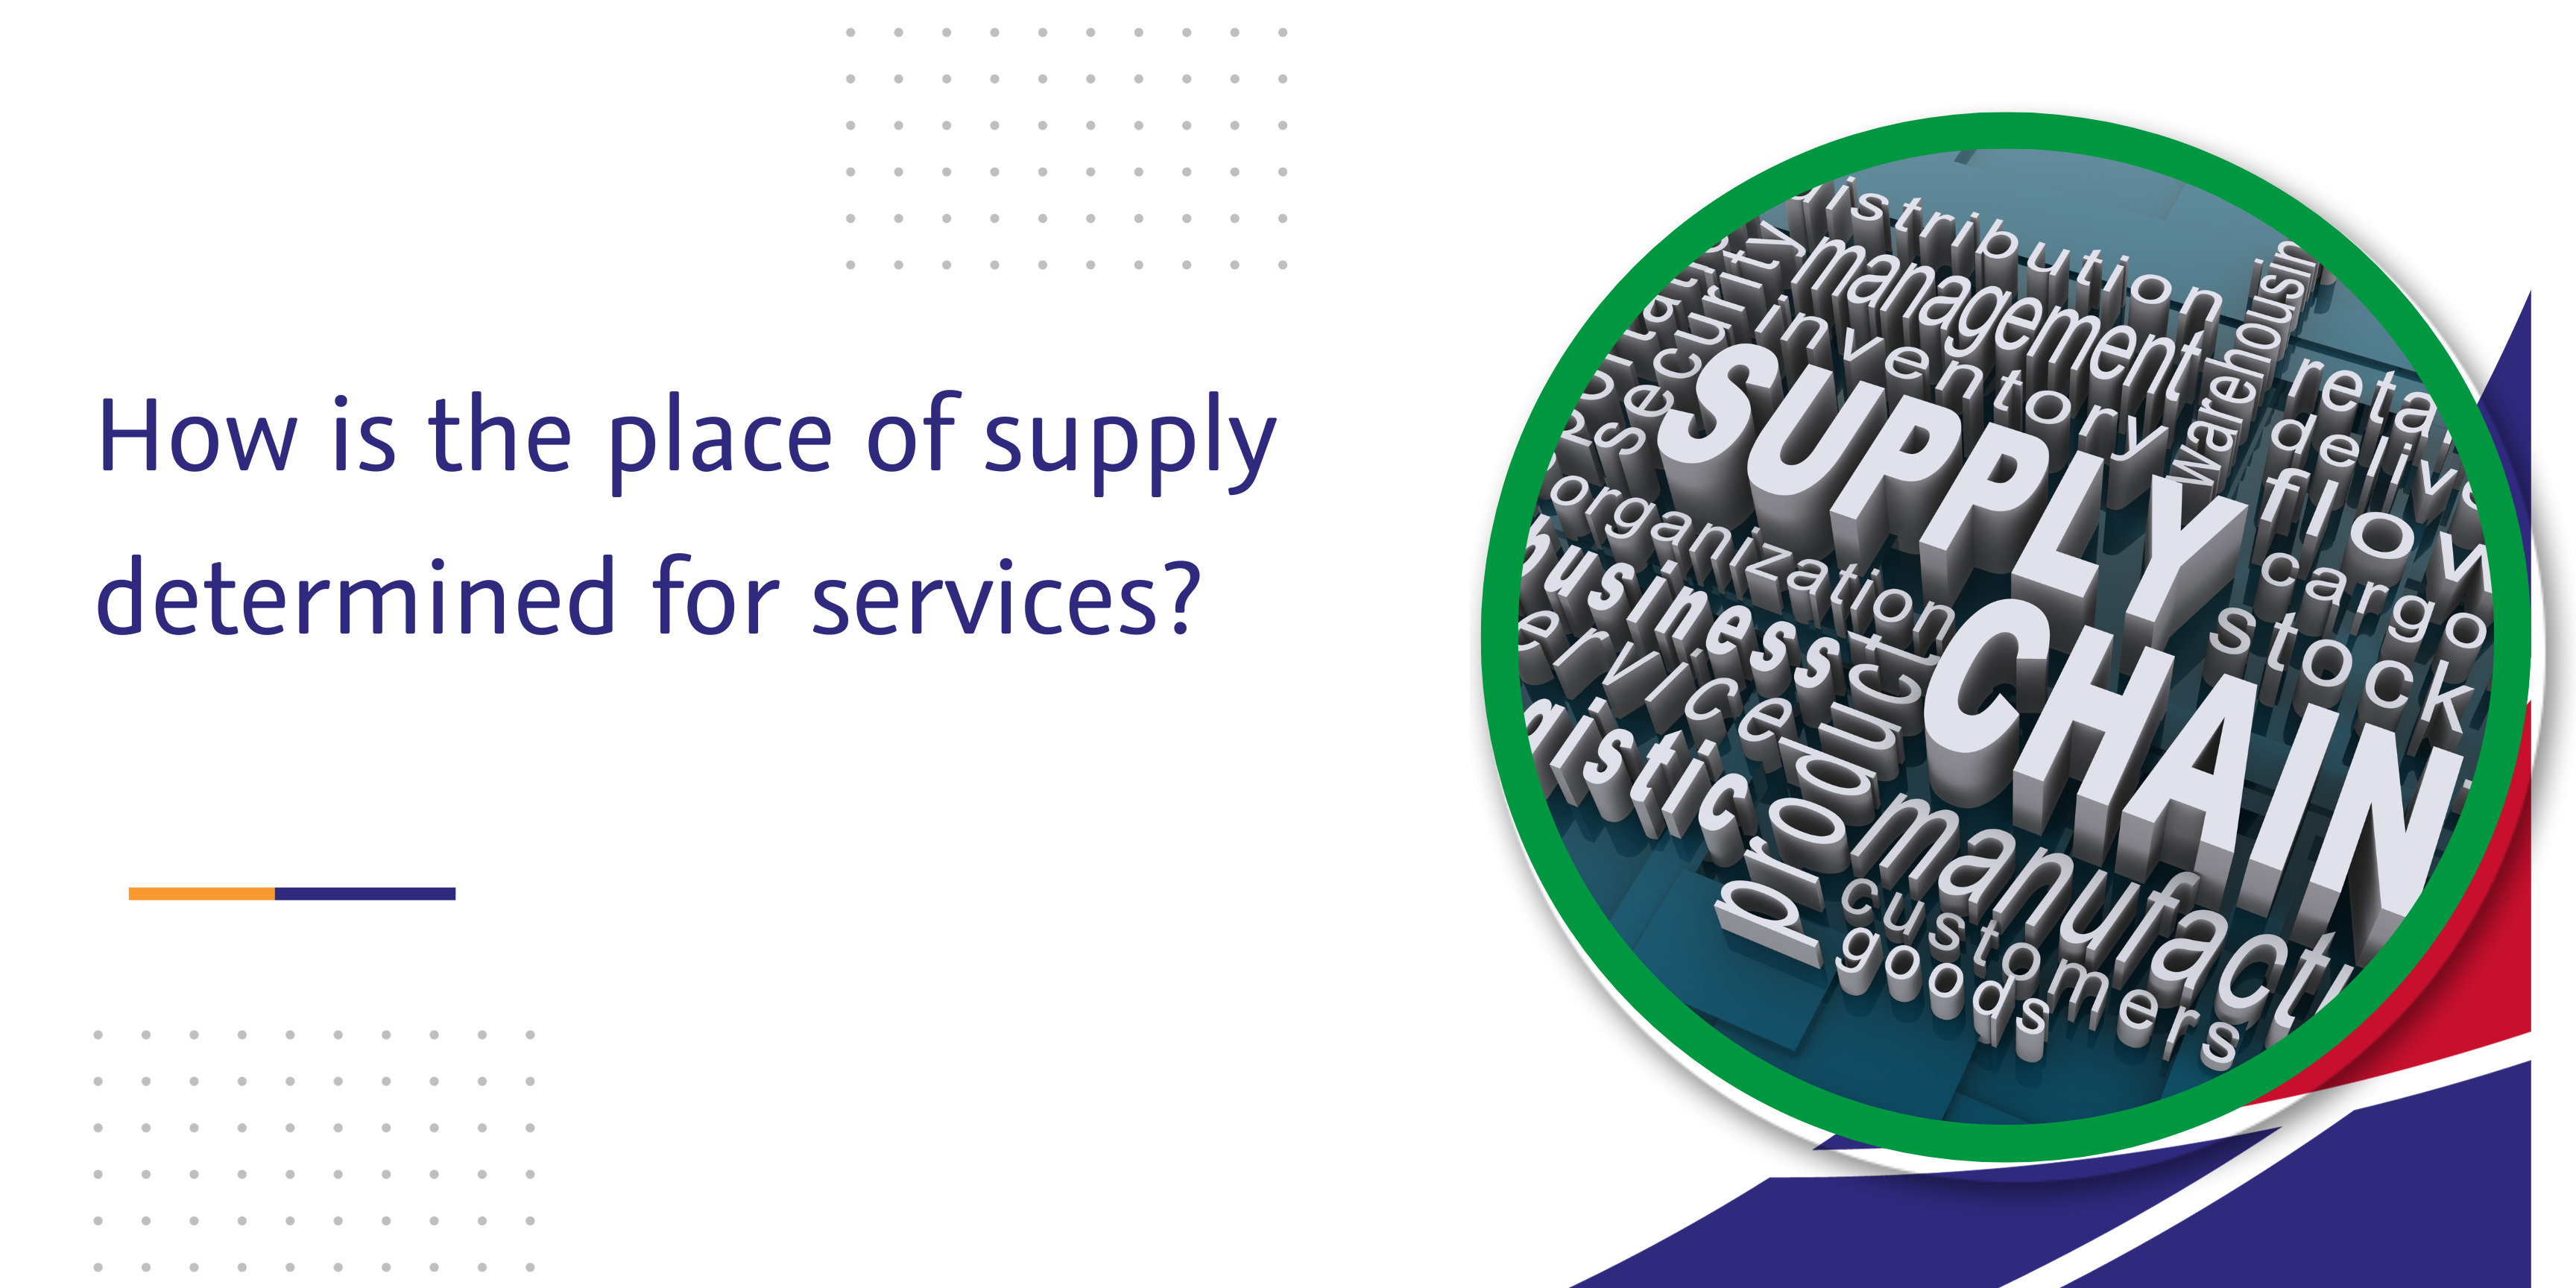 How is the place of supply determined for services?